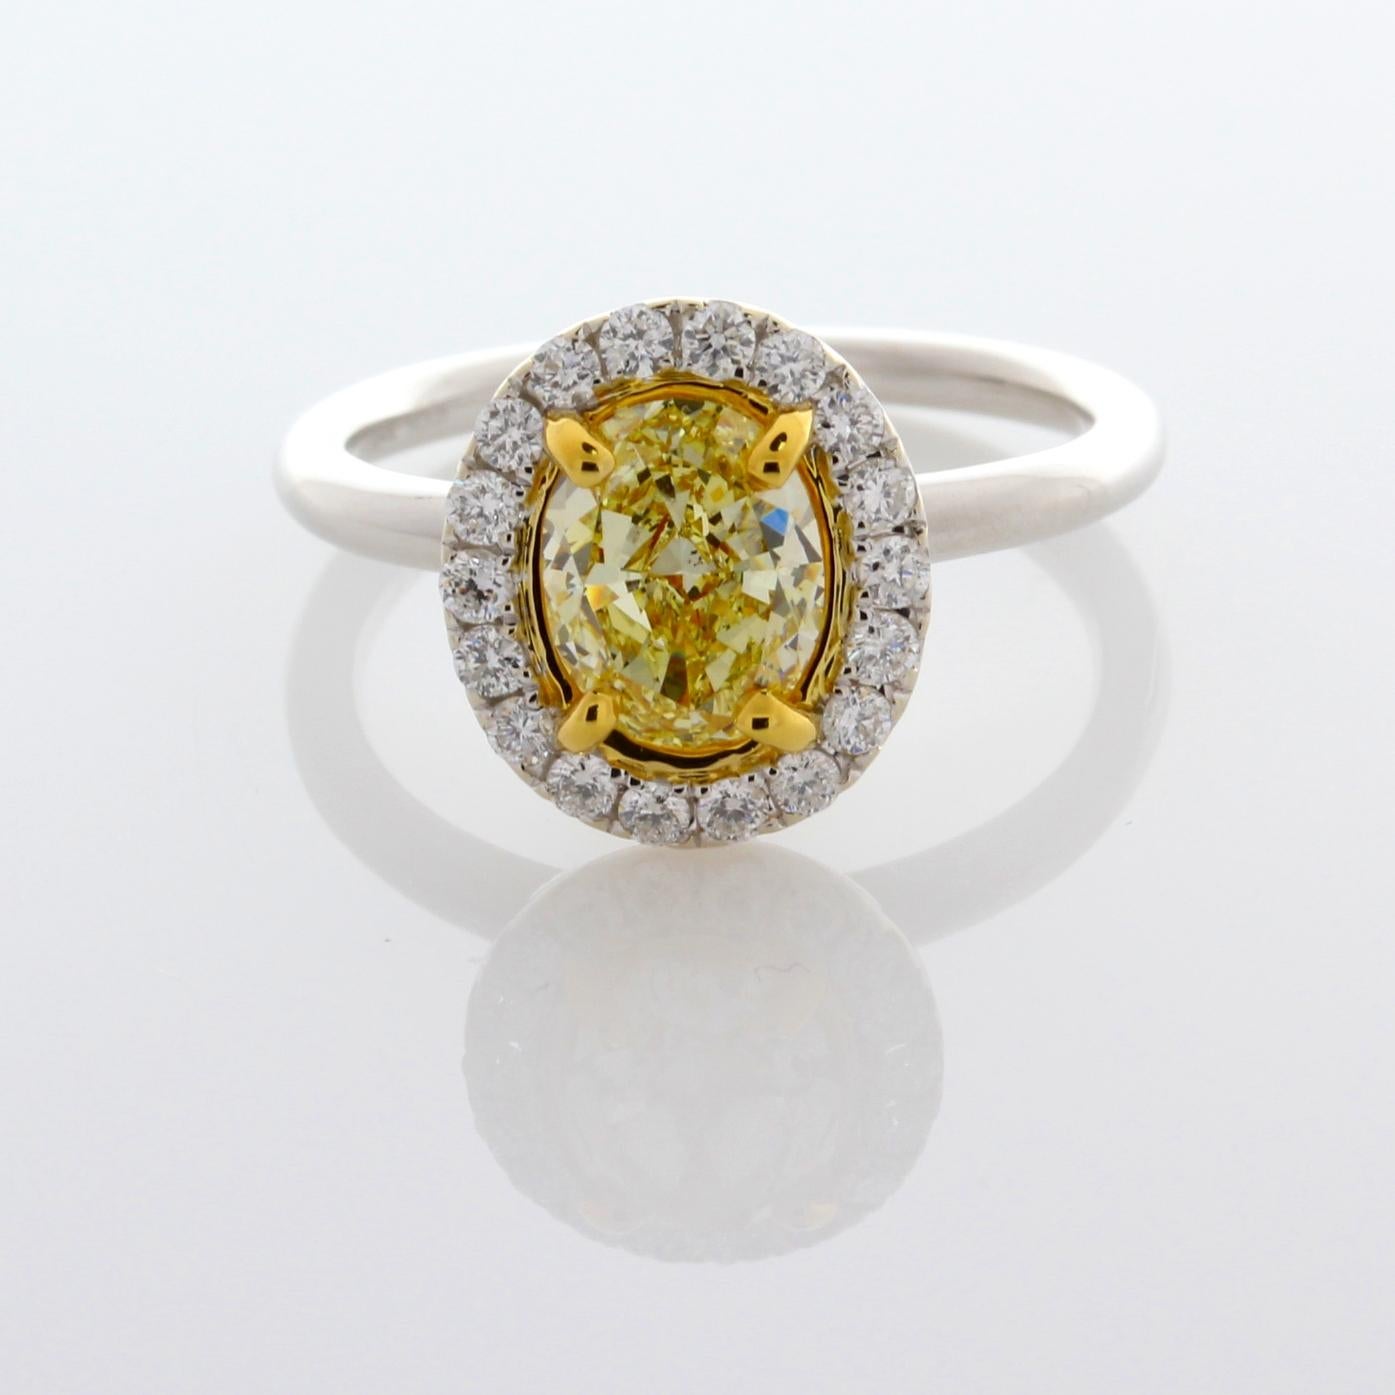 Incredible Deal on GIA Certified 1.50 Carat Oval Cut, Natural Fancy Light Yellow Even, SI1 Clarity, Diamond Ring, measuring 8.03-6.32x3.79. GIA Certificate #2181165984
Total Carat Weight on the ring is 1.90. 
This simple and elegant mounting is just